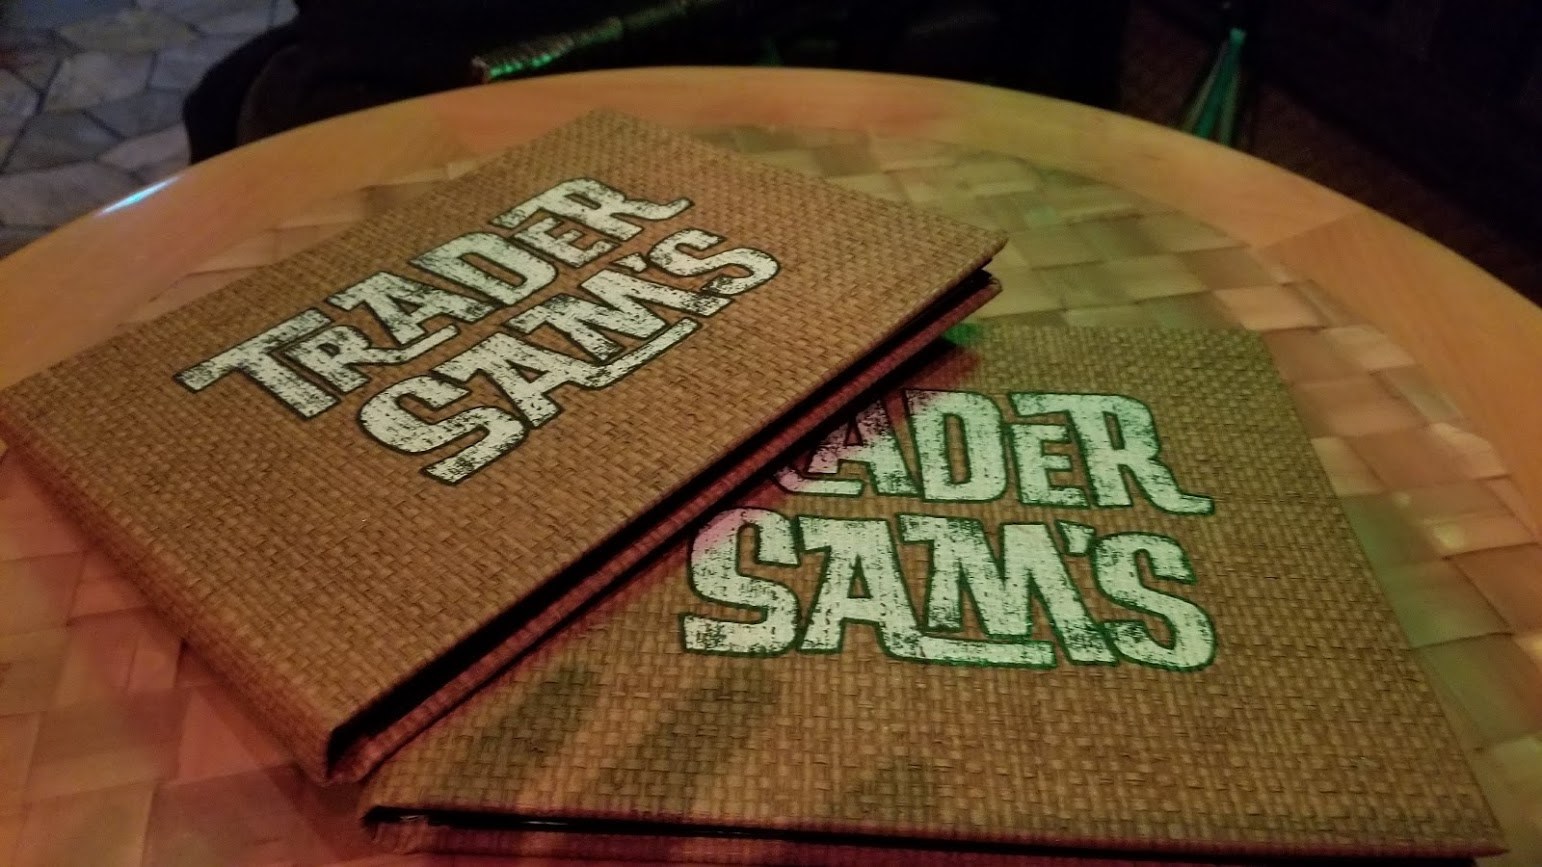 Try These Trader Sam’s Drink Recipes At Home!